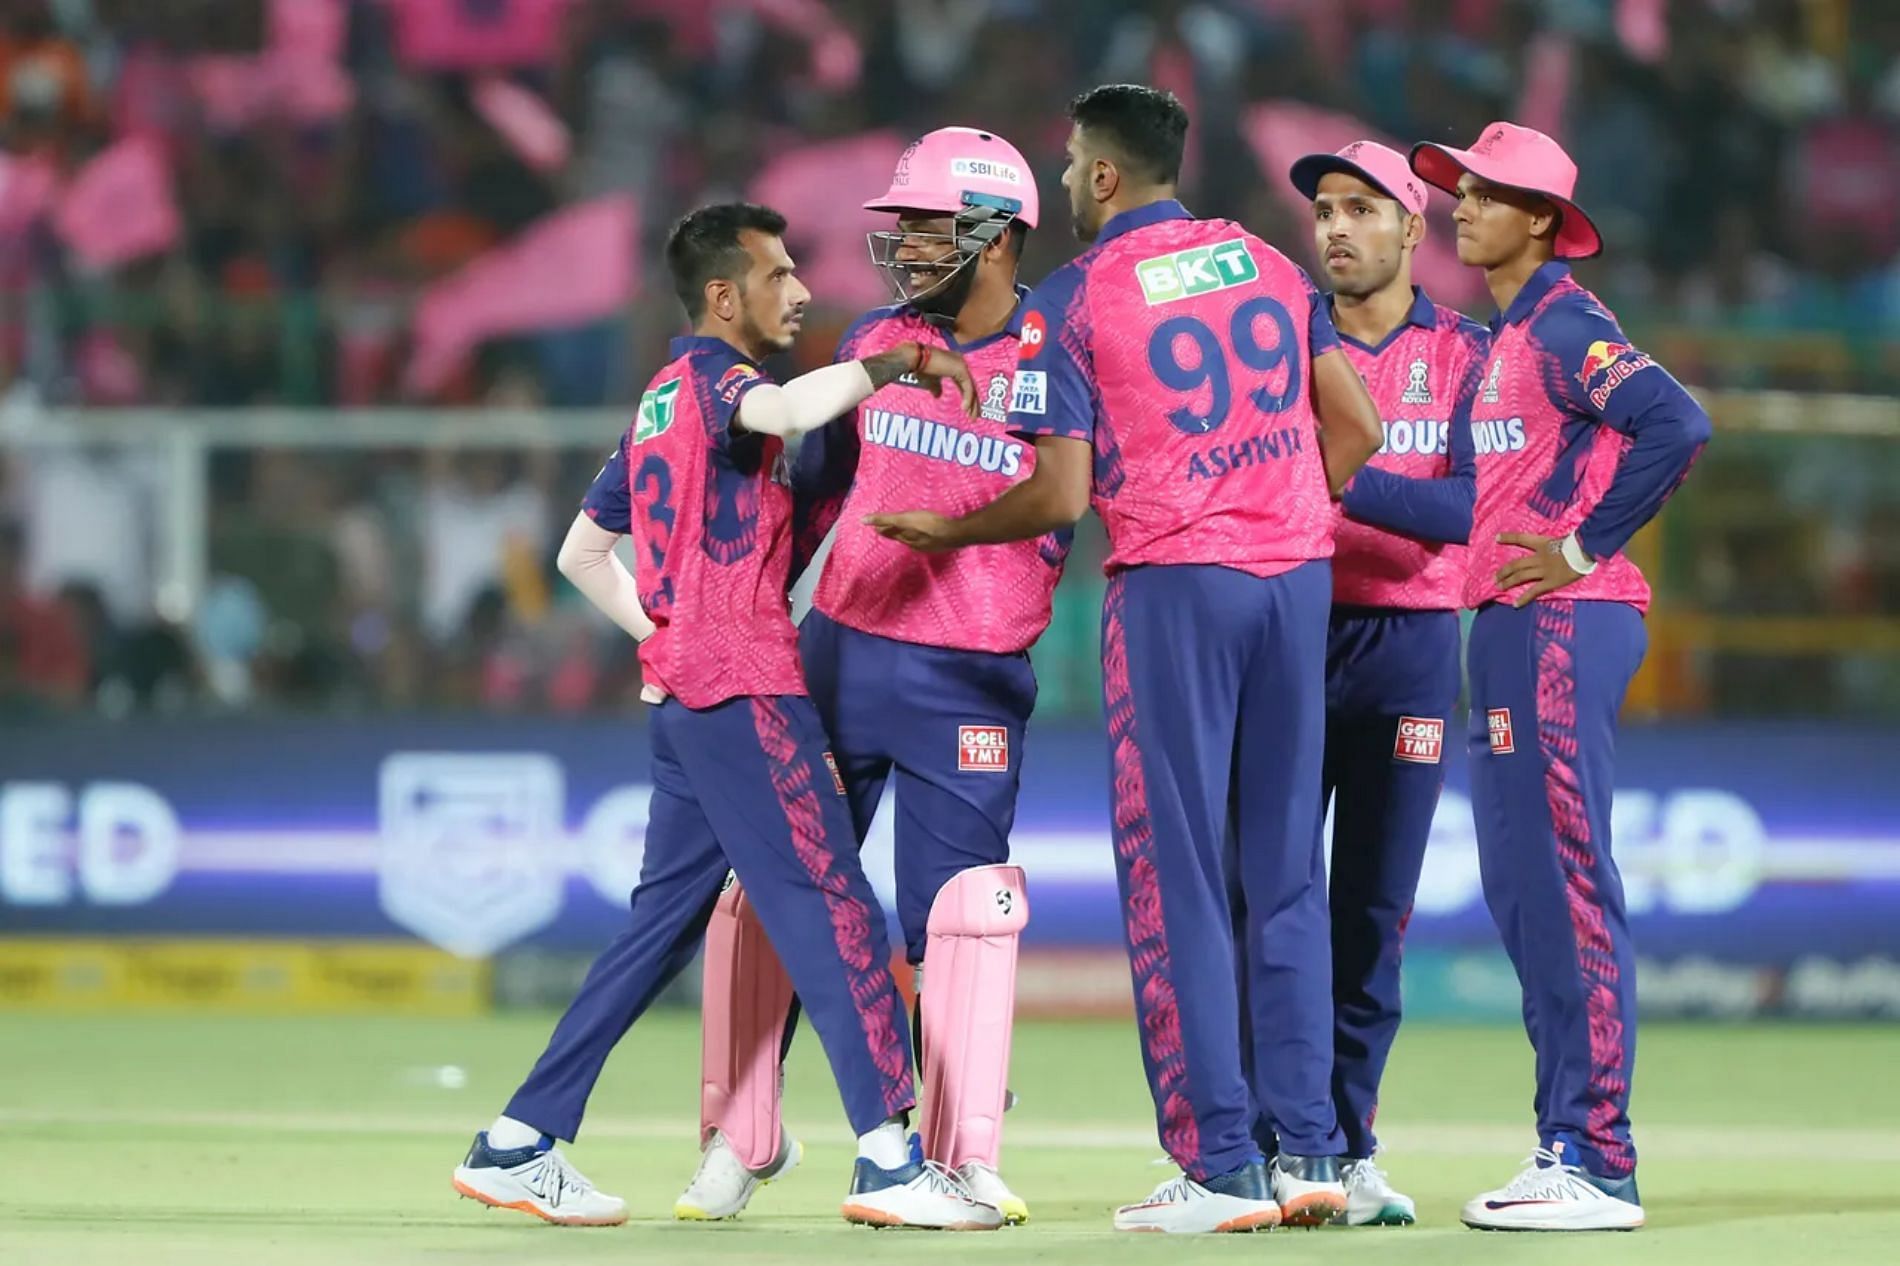 Rajasthan Royals went down to Lucknow Super Giants by 10 runs. (Pic: iplt20.com)